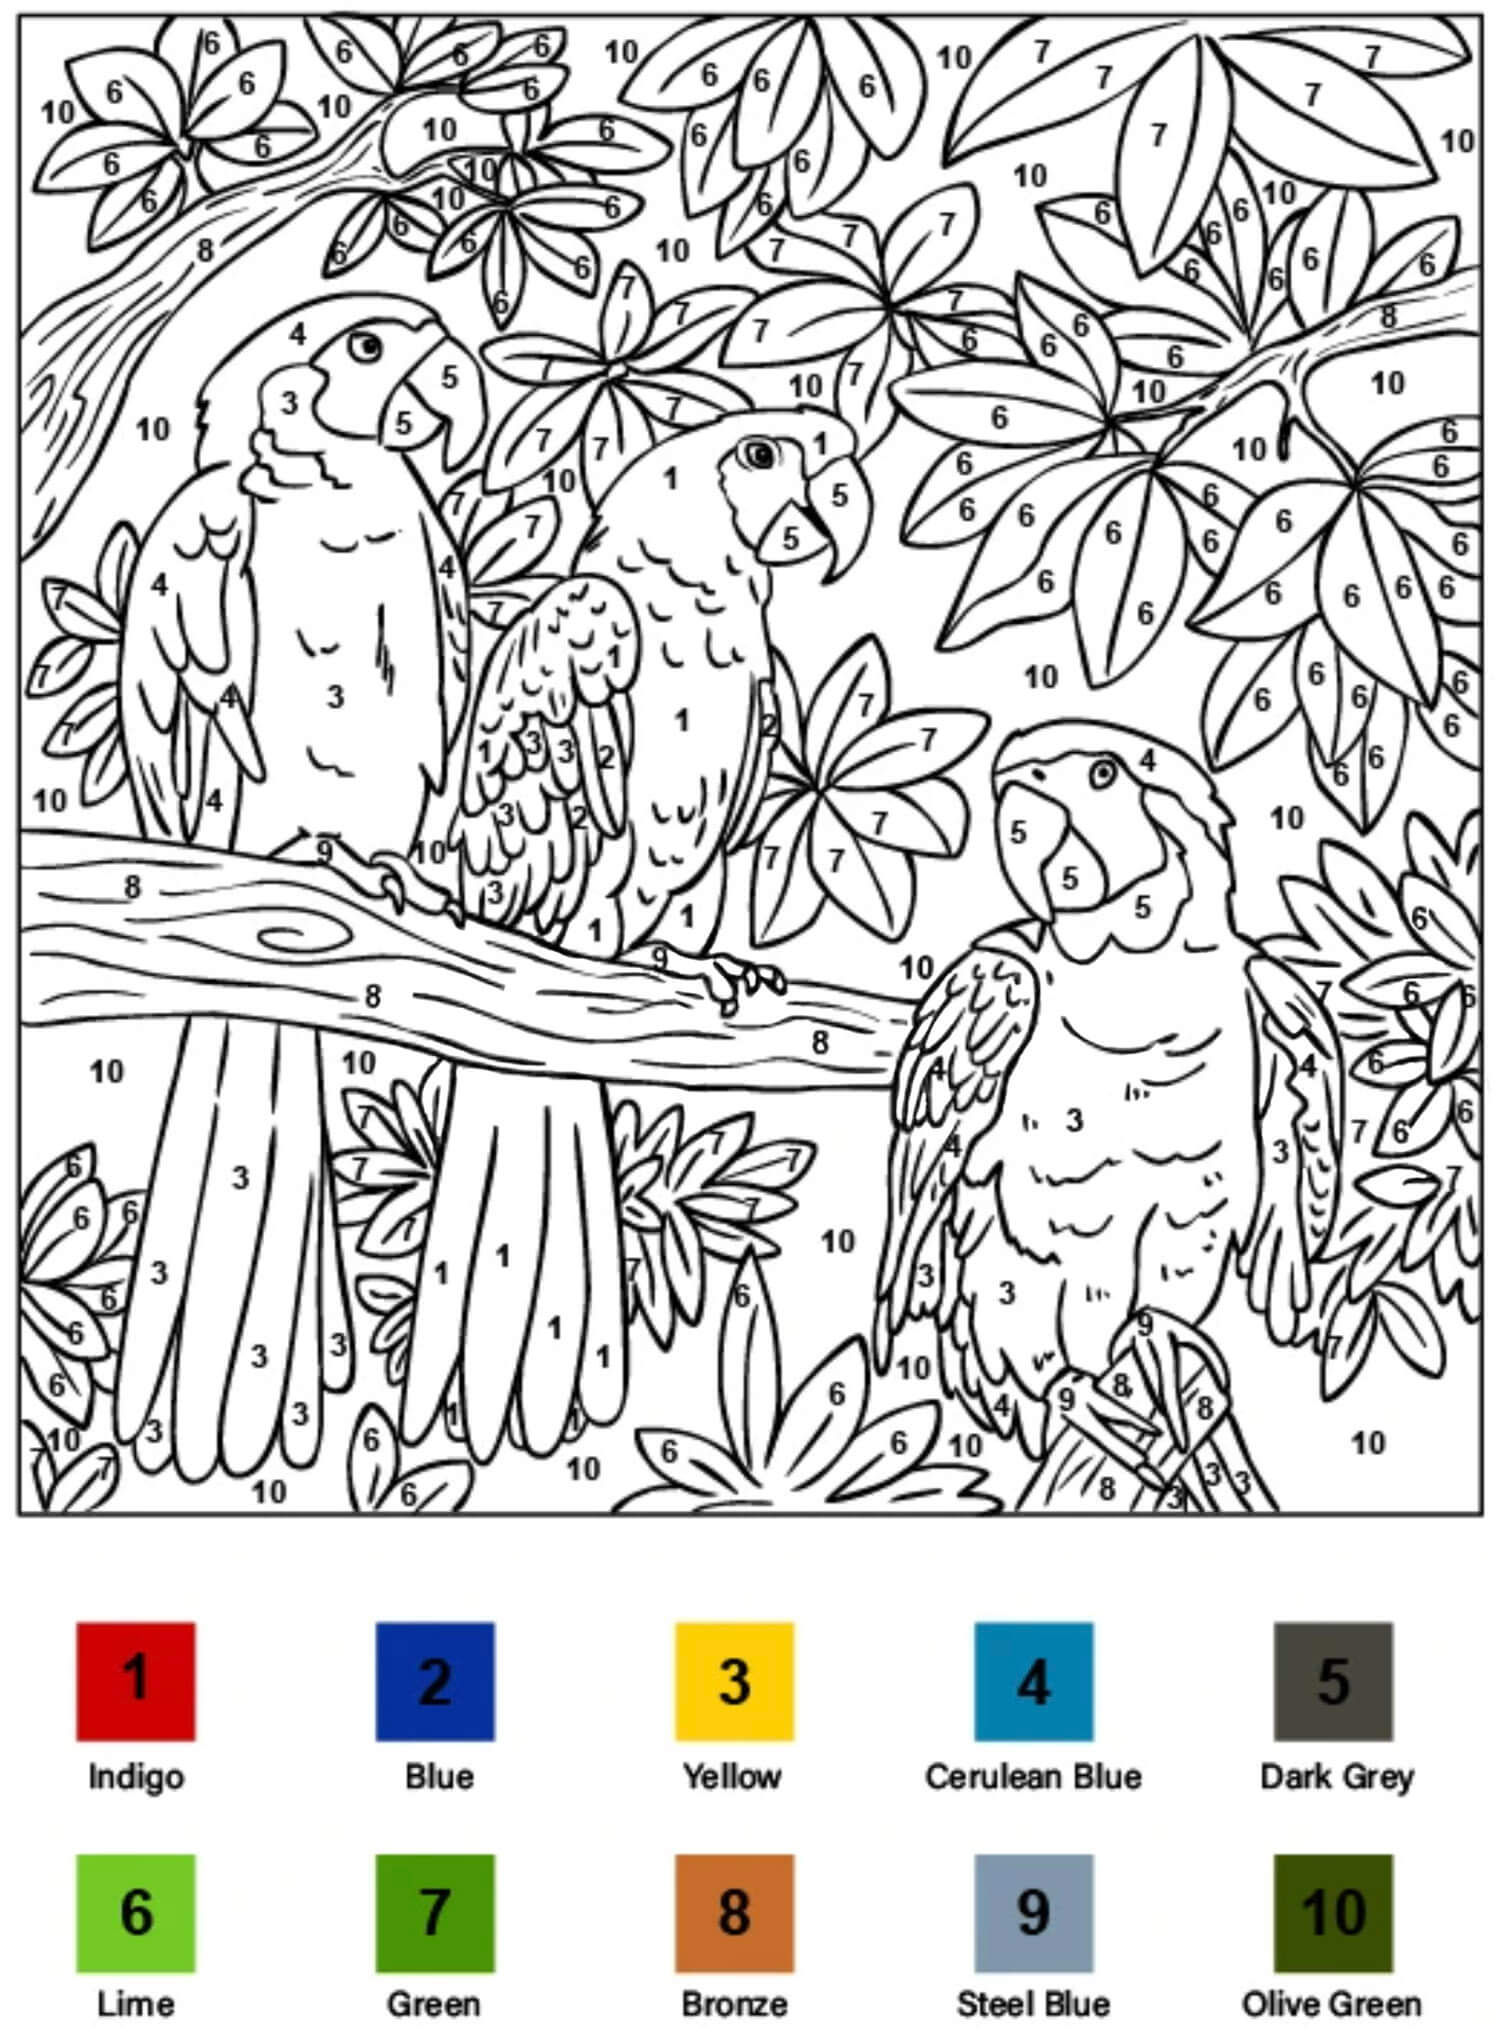 Three Parrots Color by Number